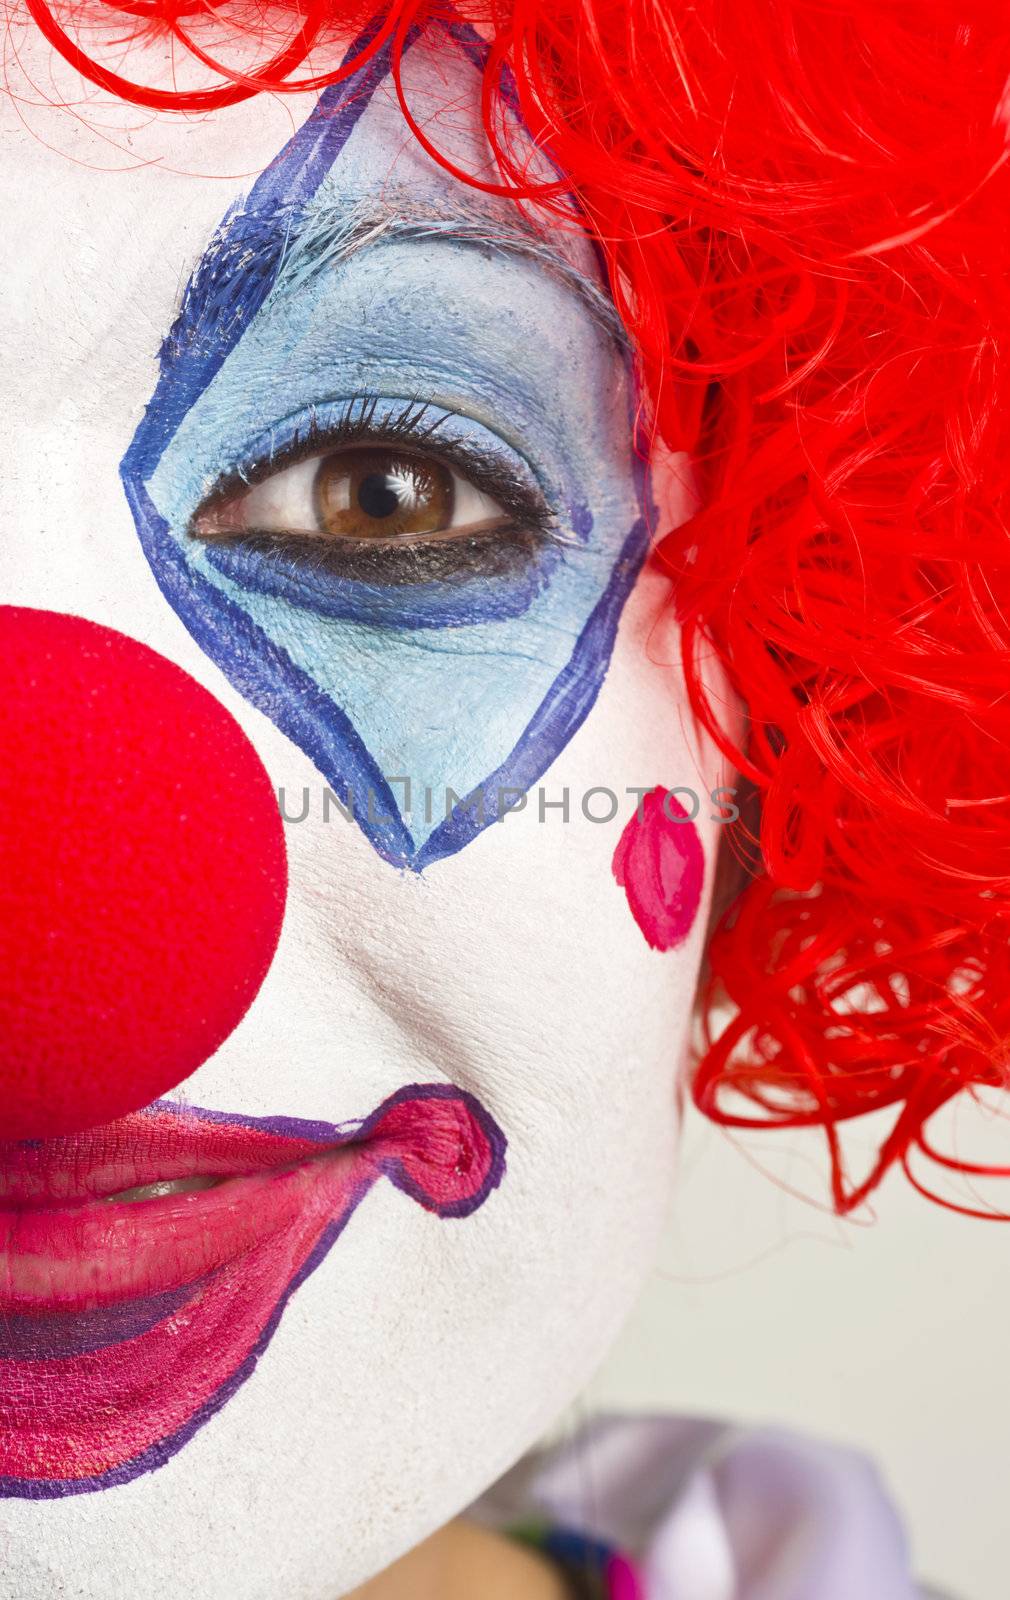 Half Clown by ChrisBoswell